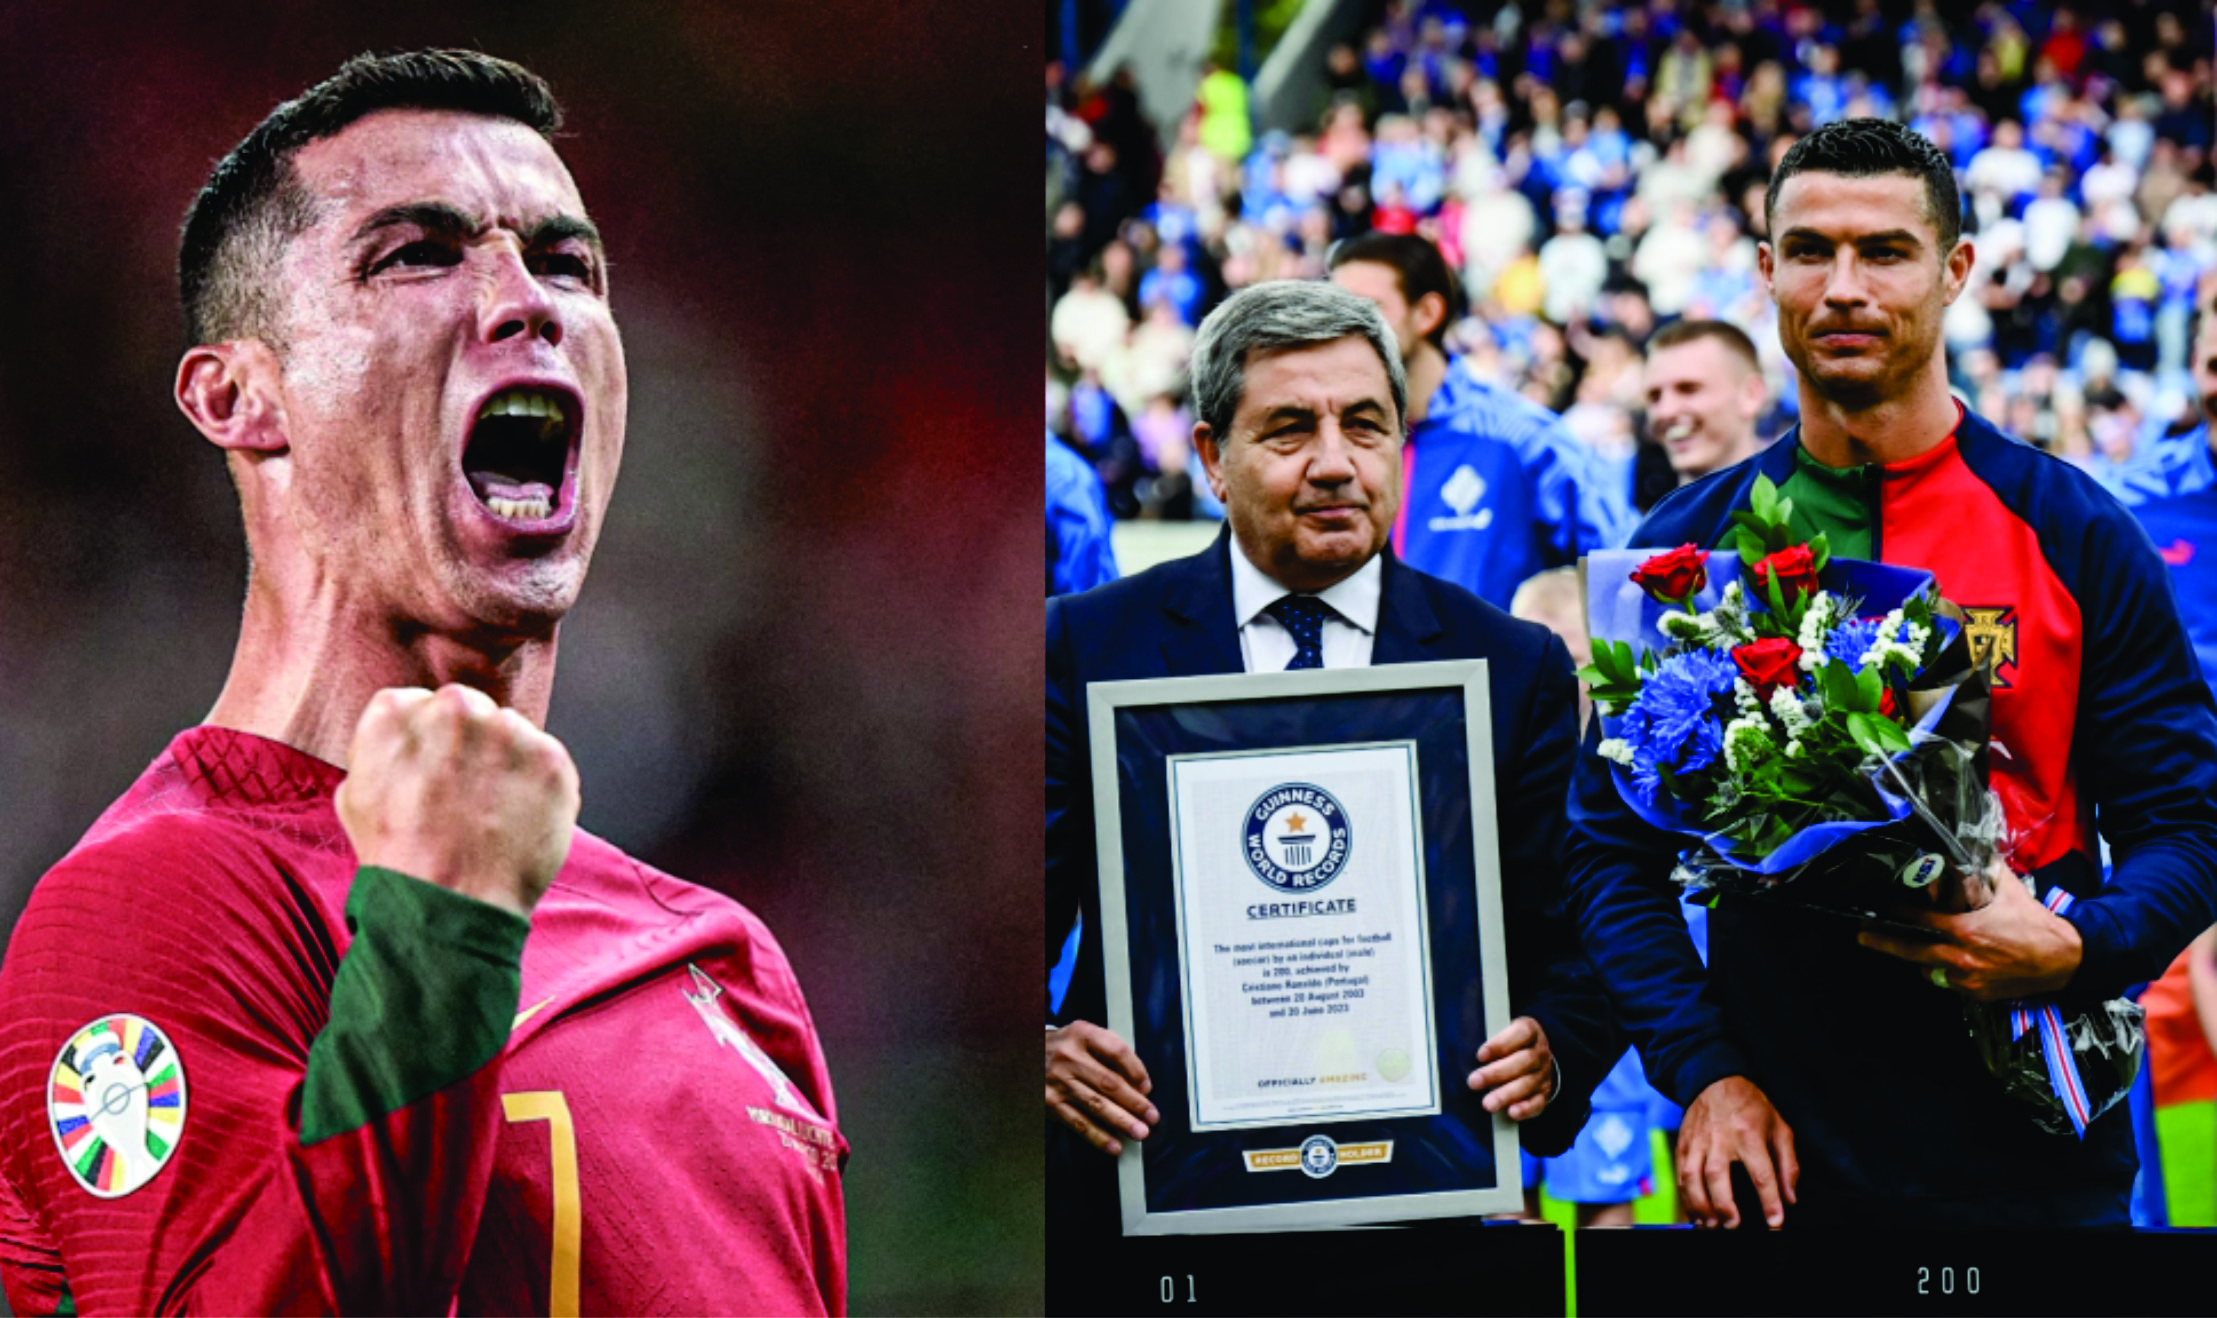 Cristiano Ronaldo presented with a Guinness World Records Plaque as he breaks another vital record